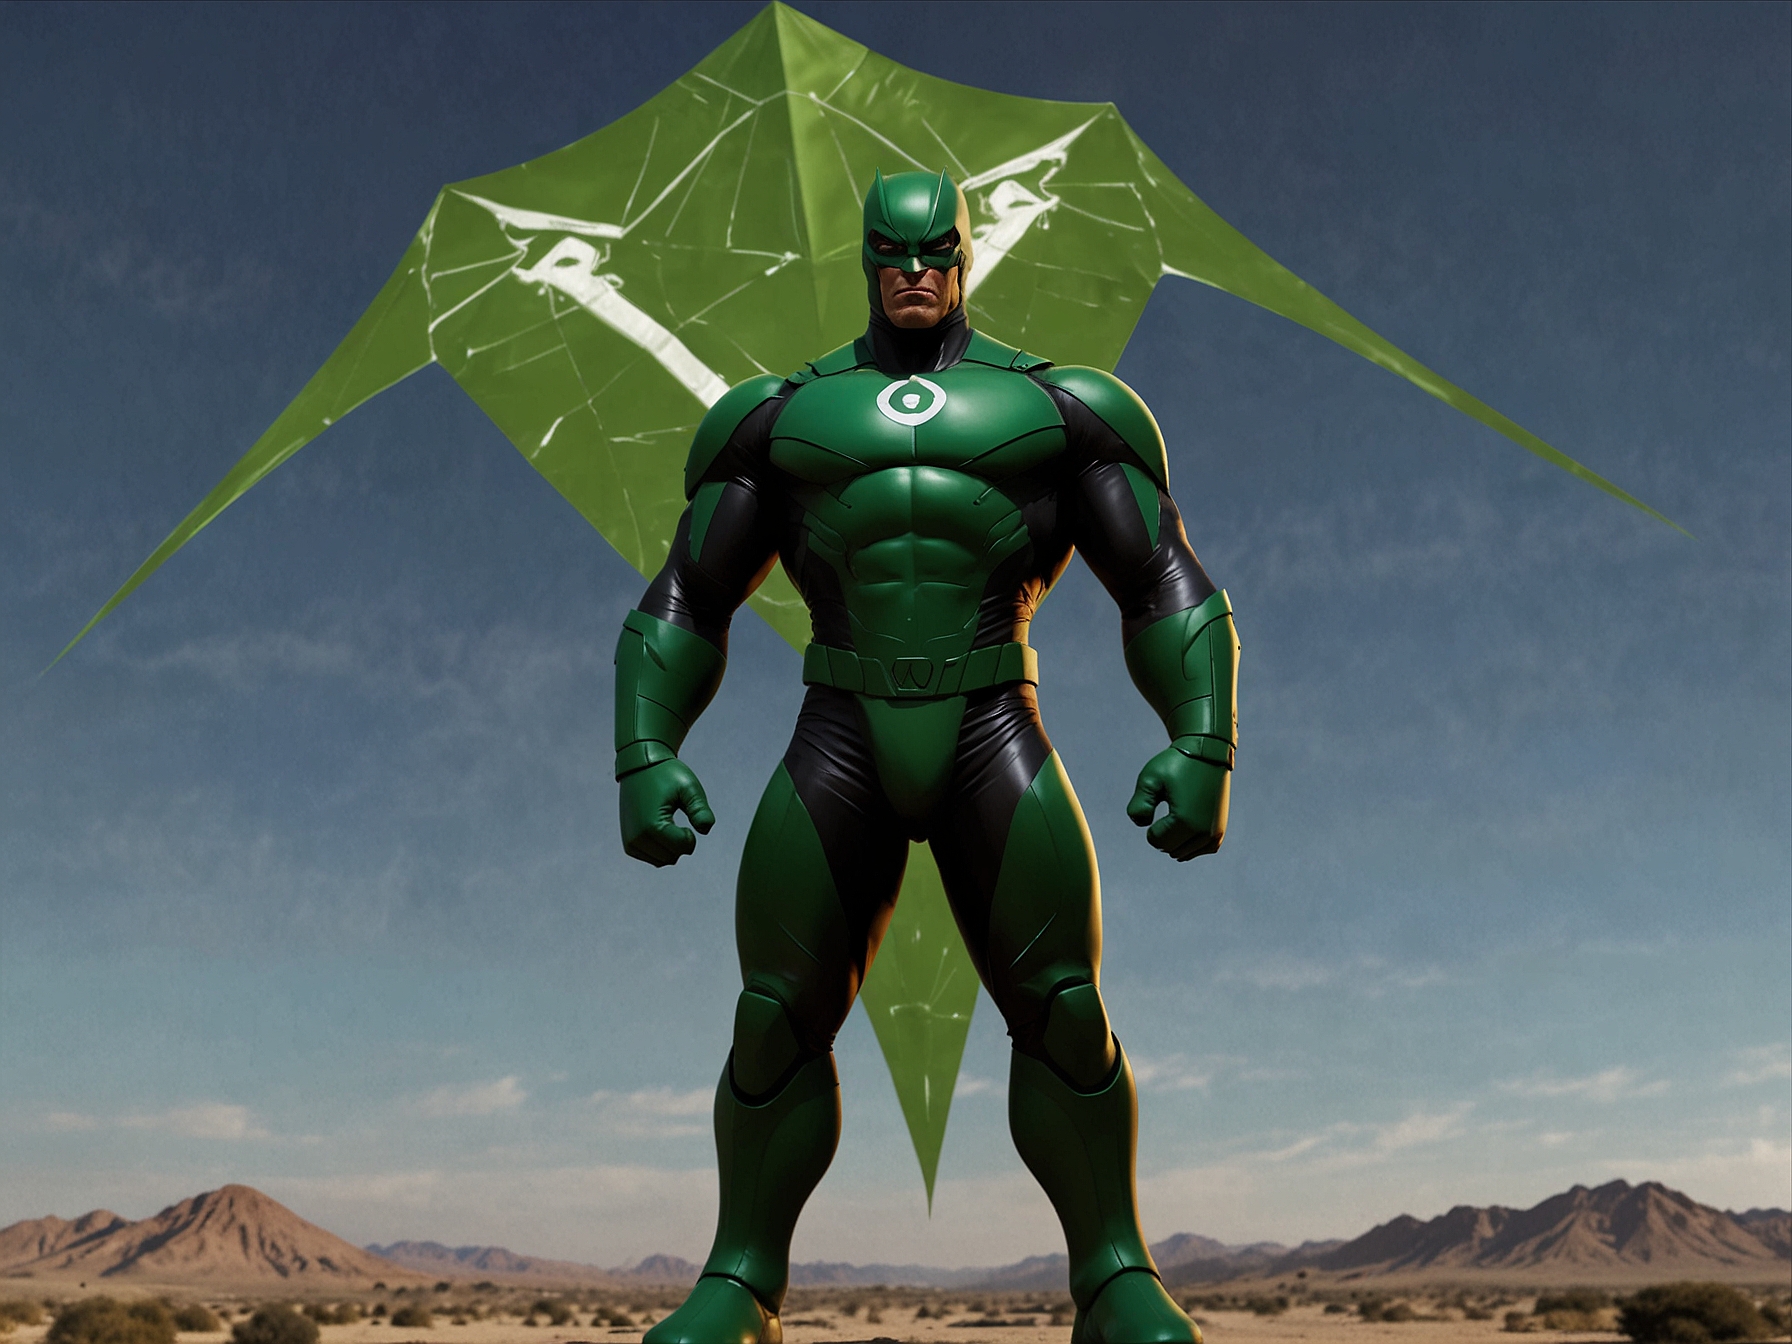 Kite Man, wearing his iconic green costume and jet-powered kite, faces Darkseid's imposing and menacing figure. The vibrant animation captures a blend of comedy and high stakes.